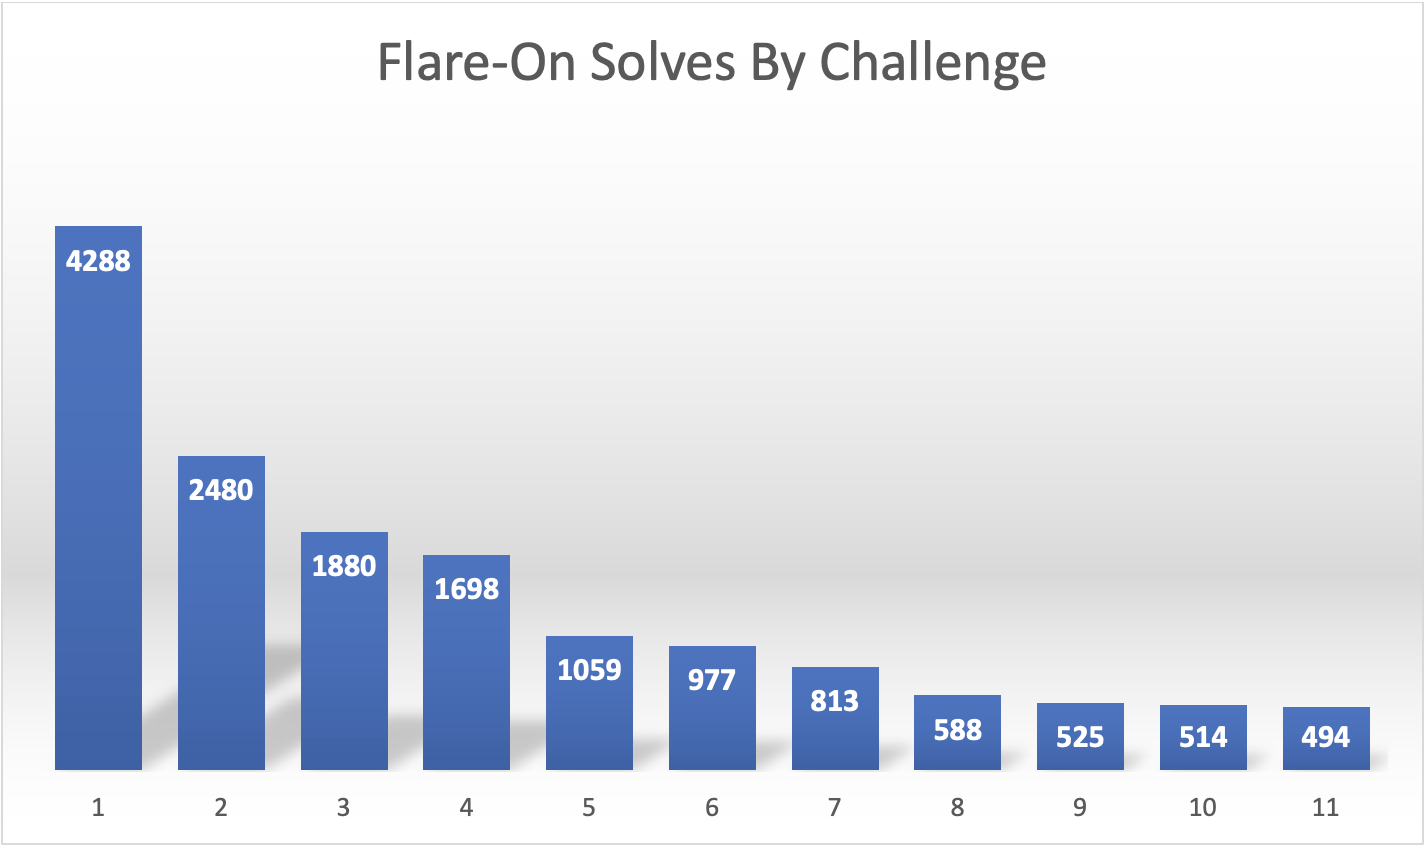 flare-on 9 challenges finished